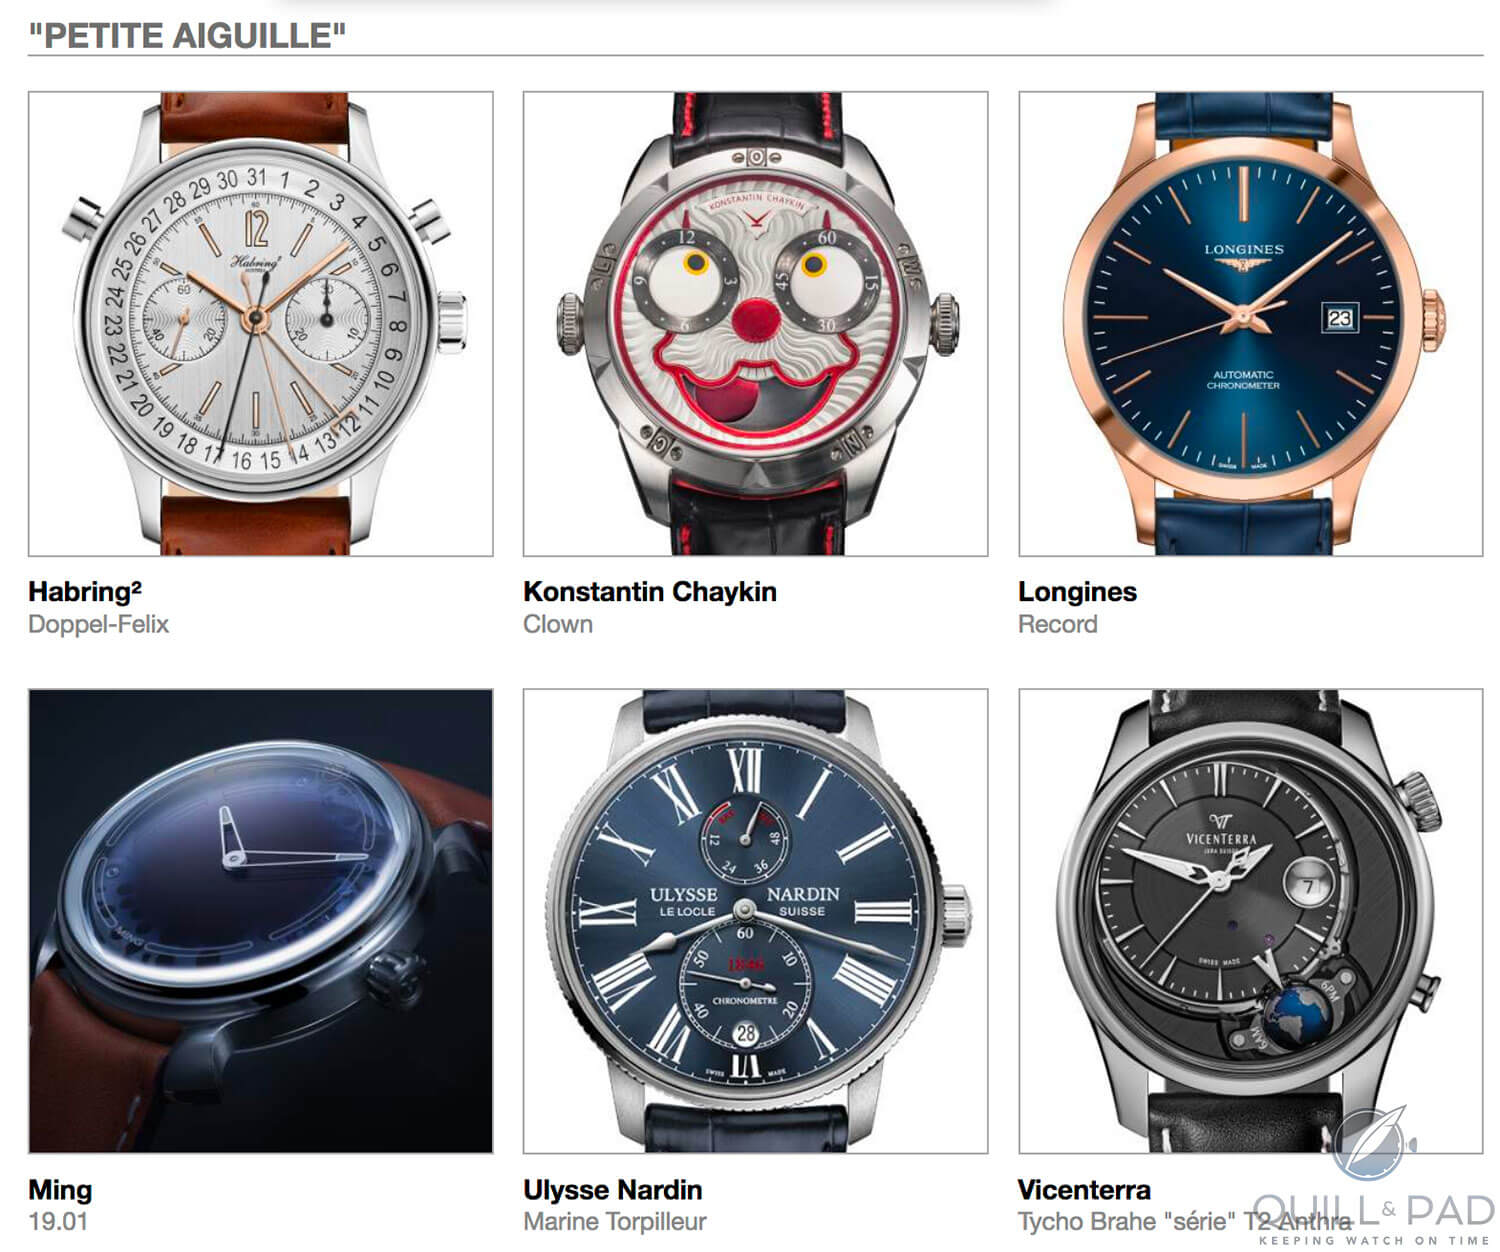 Petite Aiguille category pre-selected watches for the 2018 Grand Prix, clockwise from top left: Habring2 Doppel-Felix, Konstantin Chaykin Clown, Longines Record, Ming 19.01, Ulysse Nardin Marine Torpilleur, and Vicenterra Tycho Brahe Série T2 Anthra d’Horlogerie de Genève